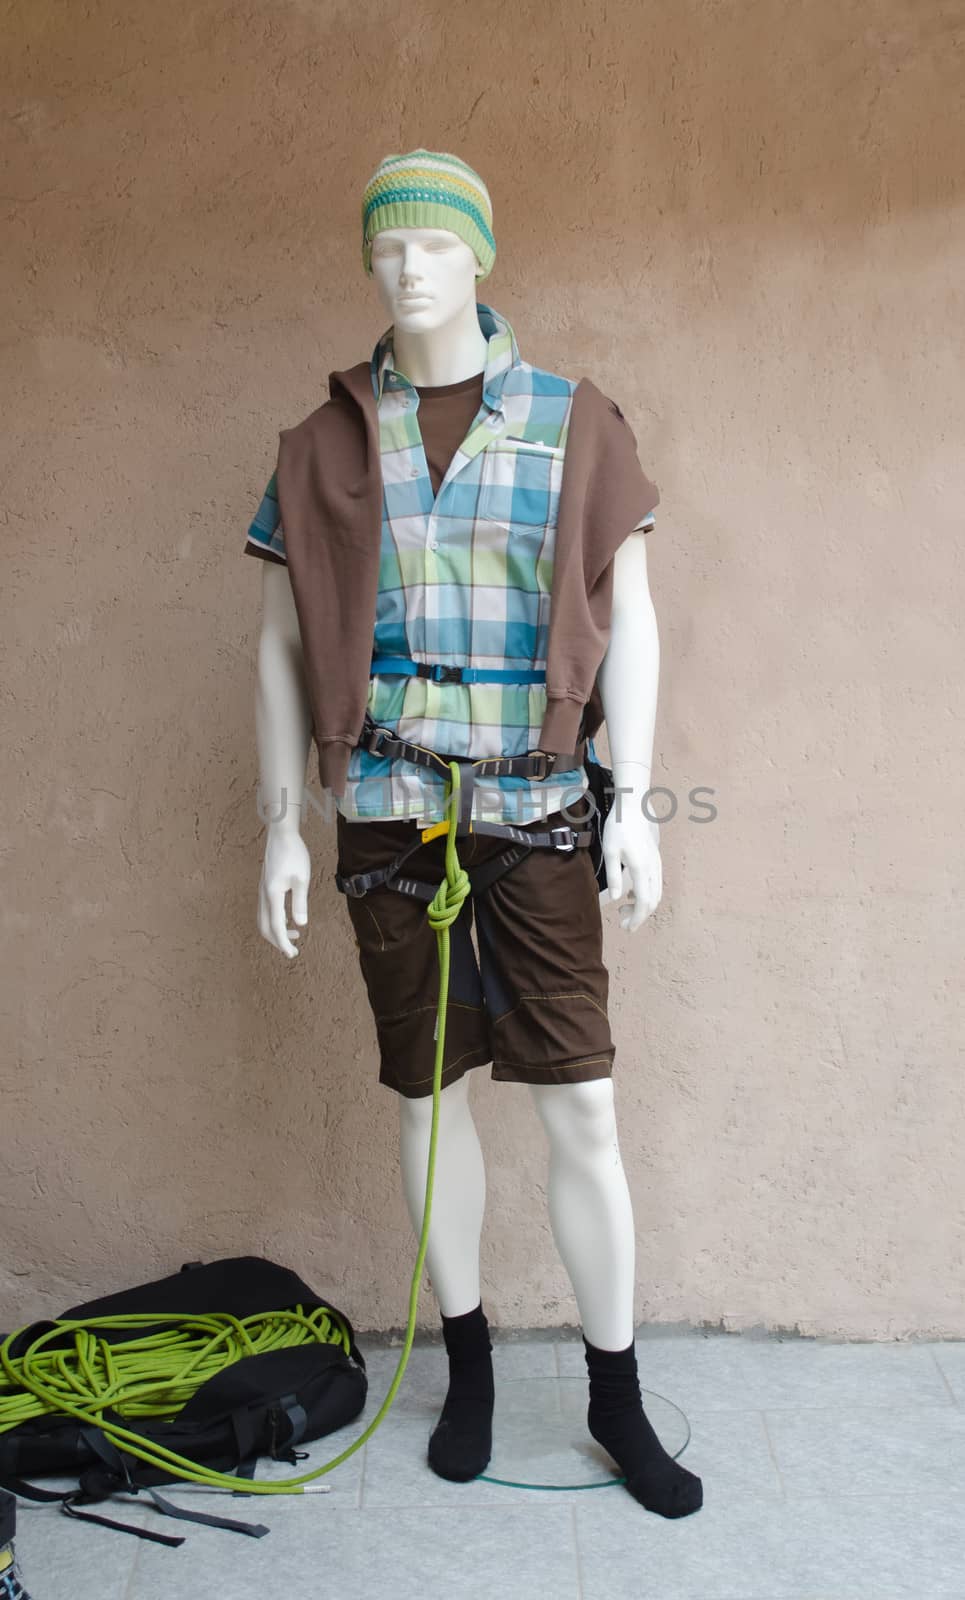 One male mannequin with mountaineering equipment. Mountaineer clothes